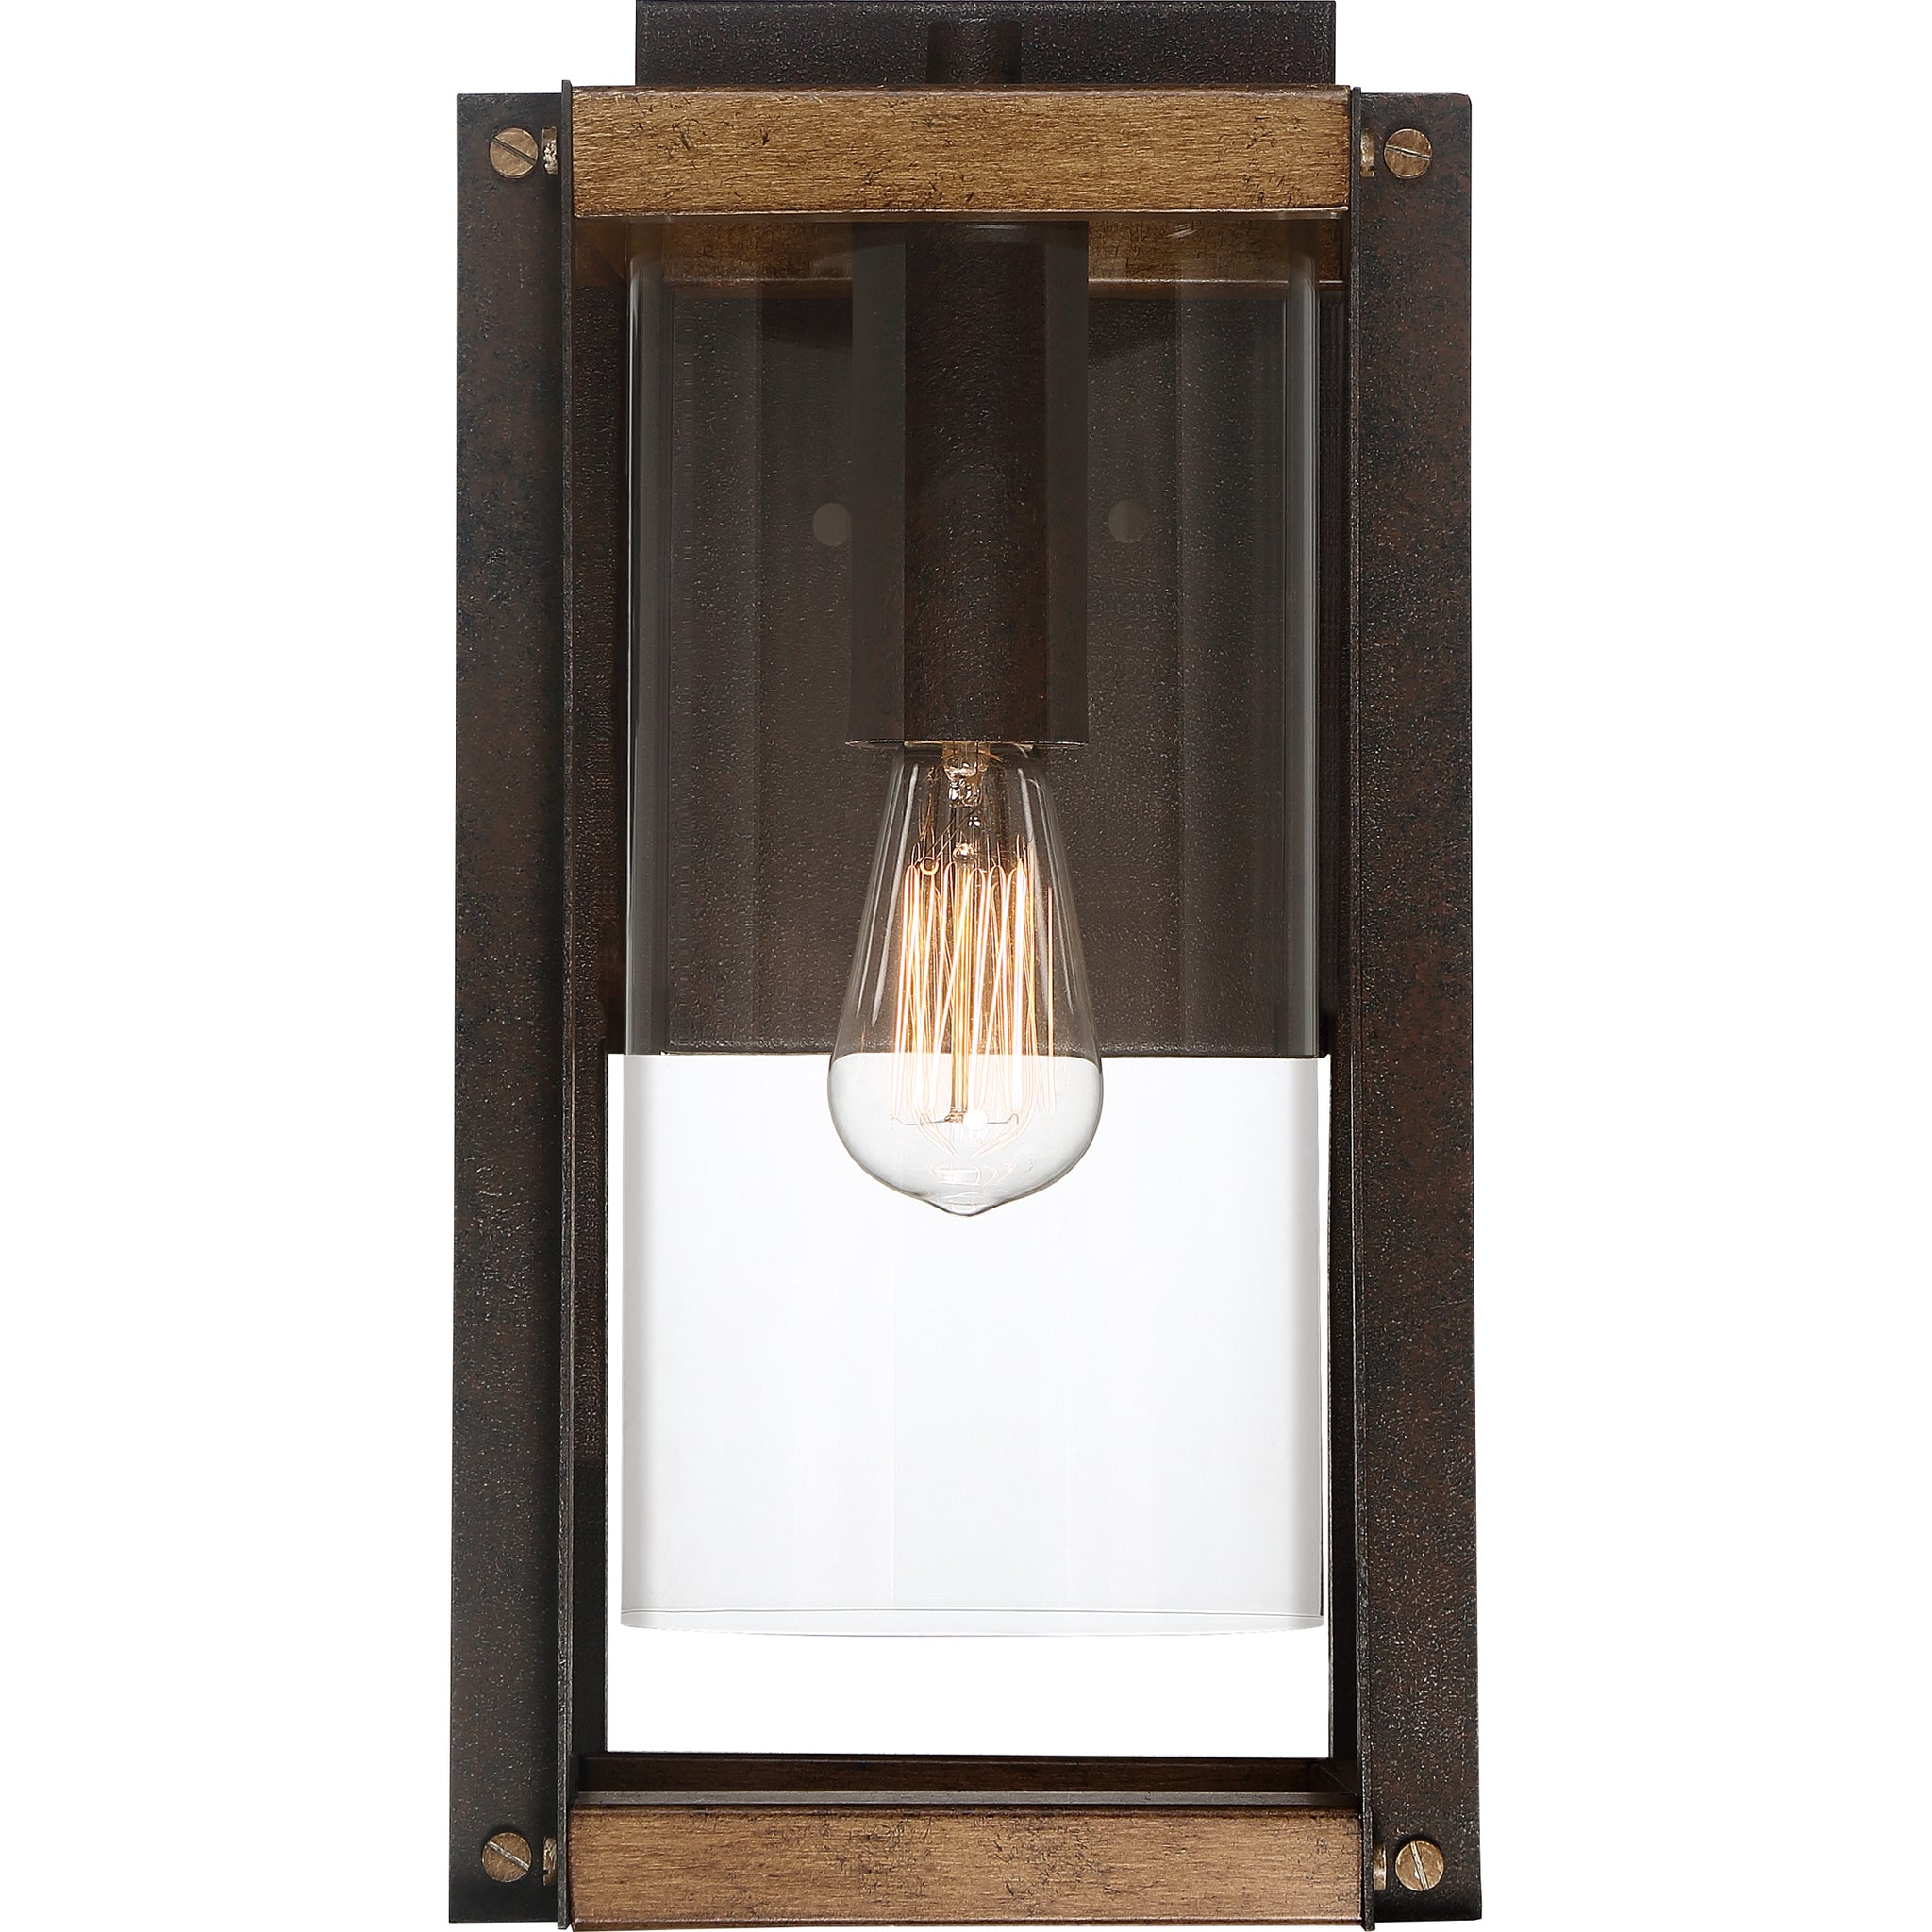 Marion Square Outdoor Wall Light Rustic Black